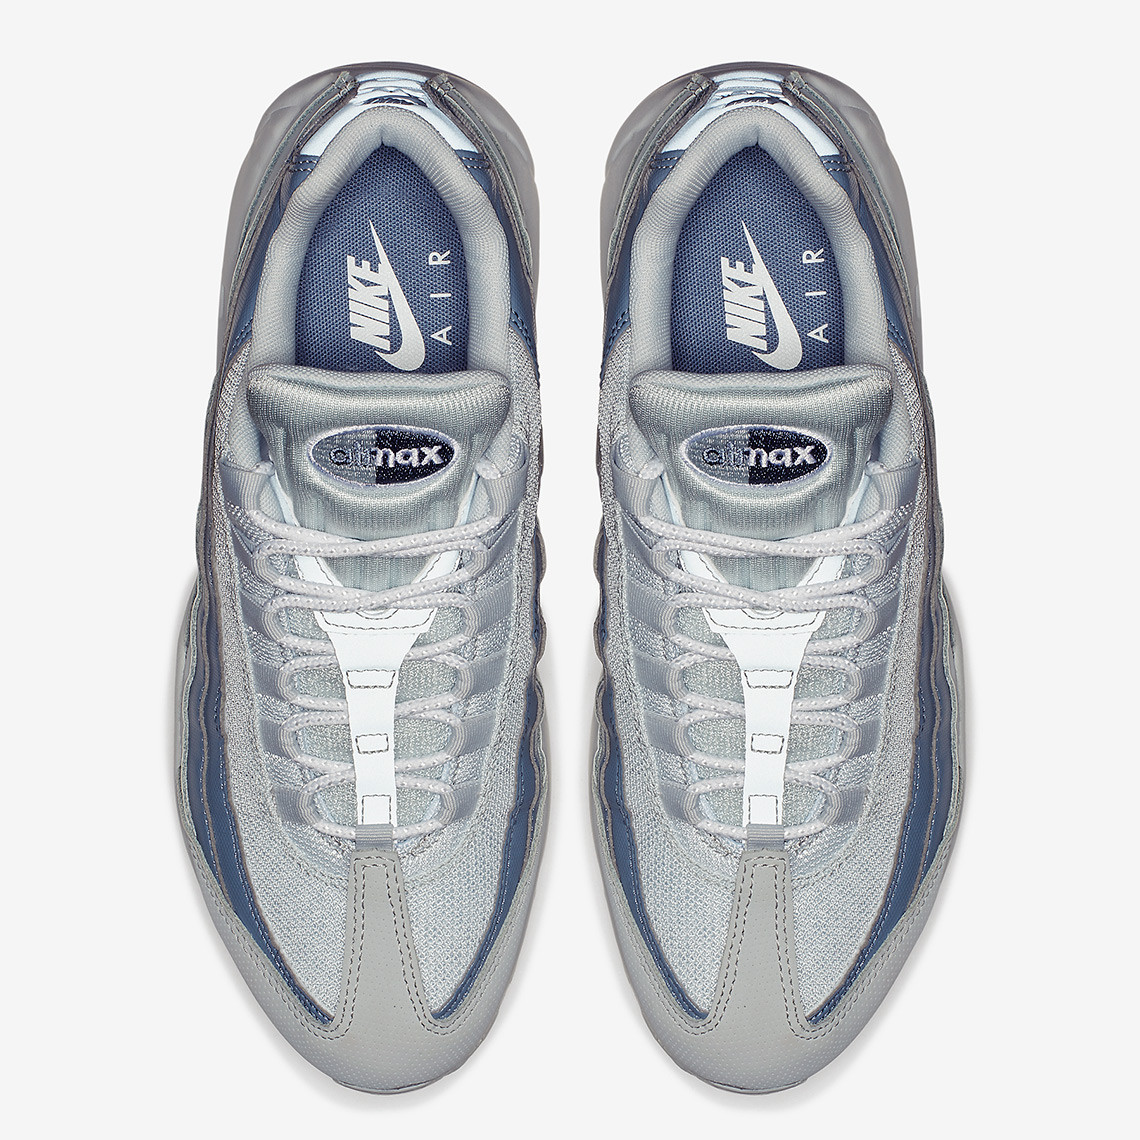 Shady Business There, Nike Air Max 95 Shady Business there, Nike Air Max 95